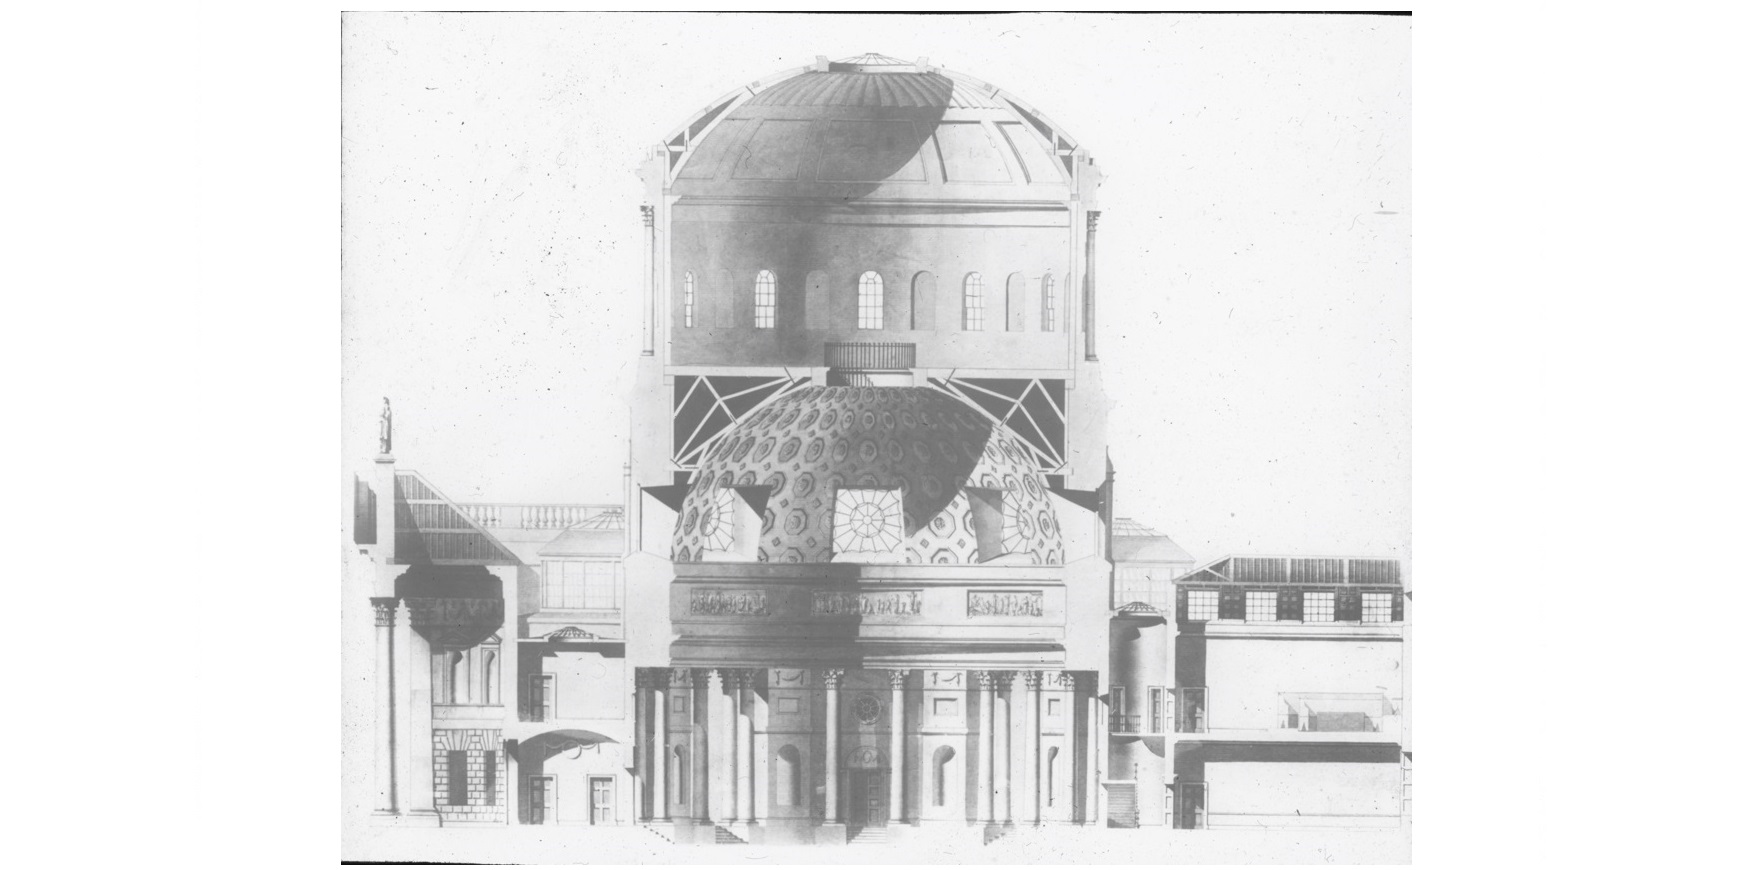 James Gandon's design for the dome